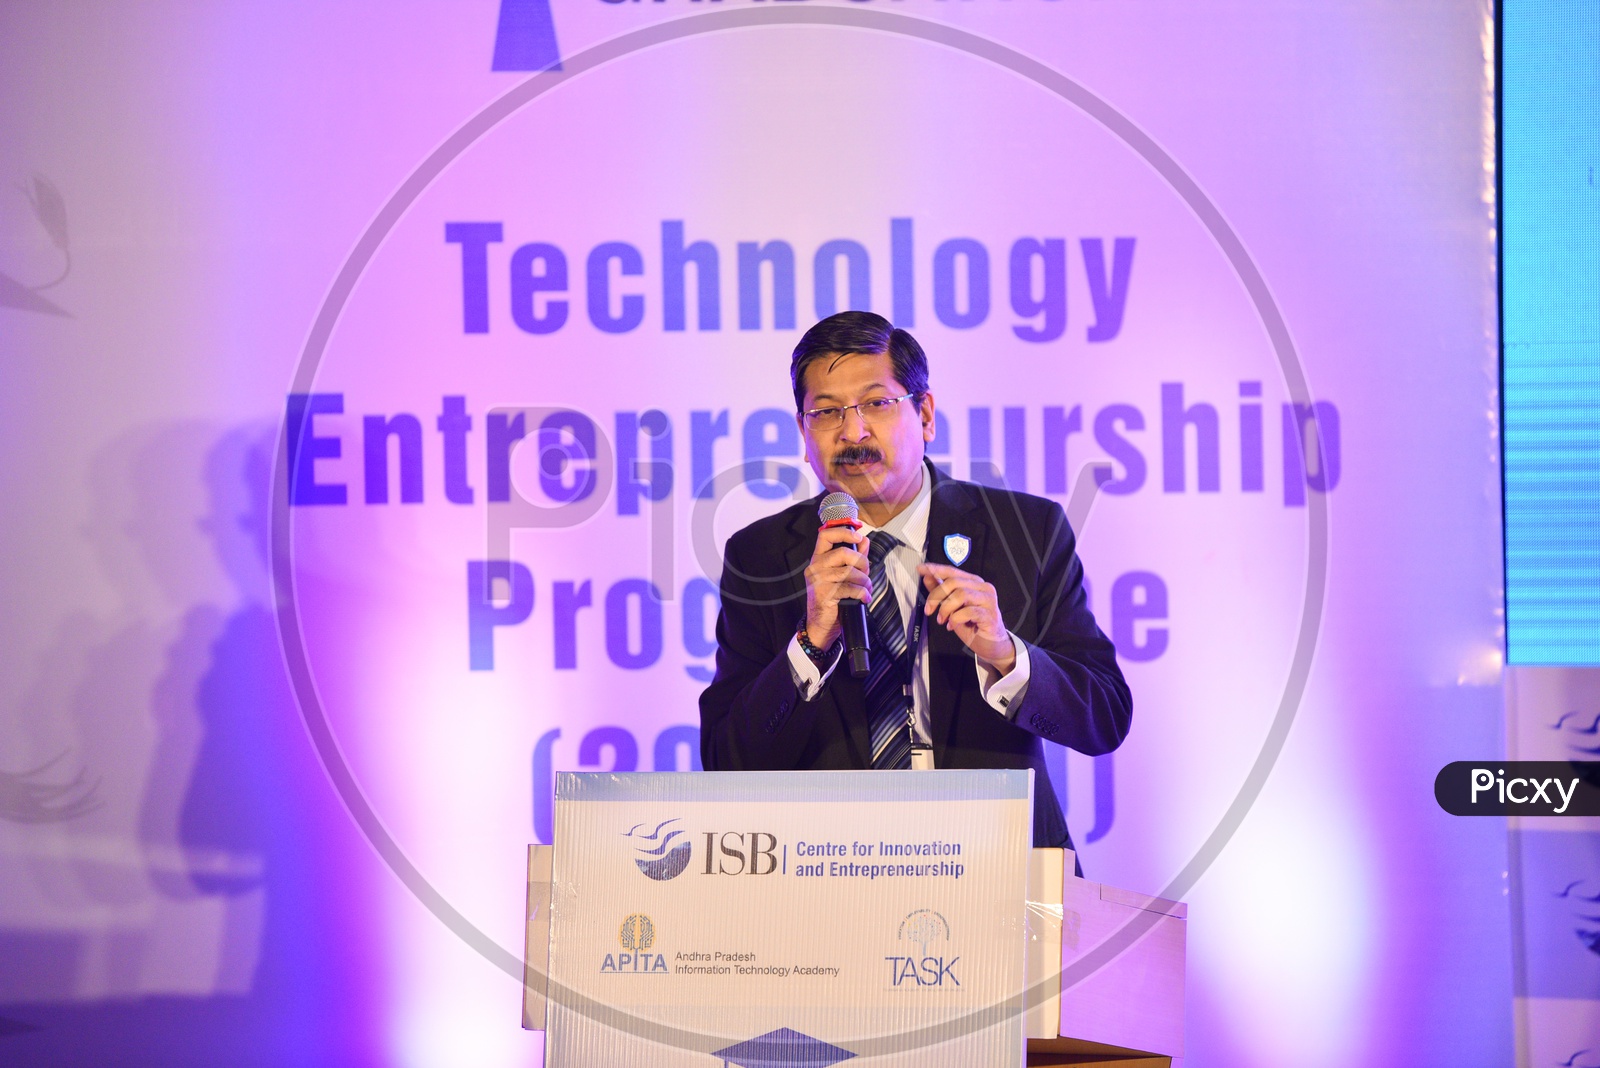 Srikanth Sinha, CEO, TASK - Telangana Academy for Skill and Knowledge